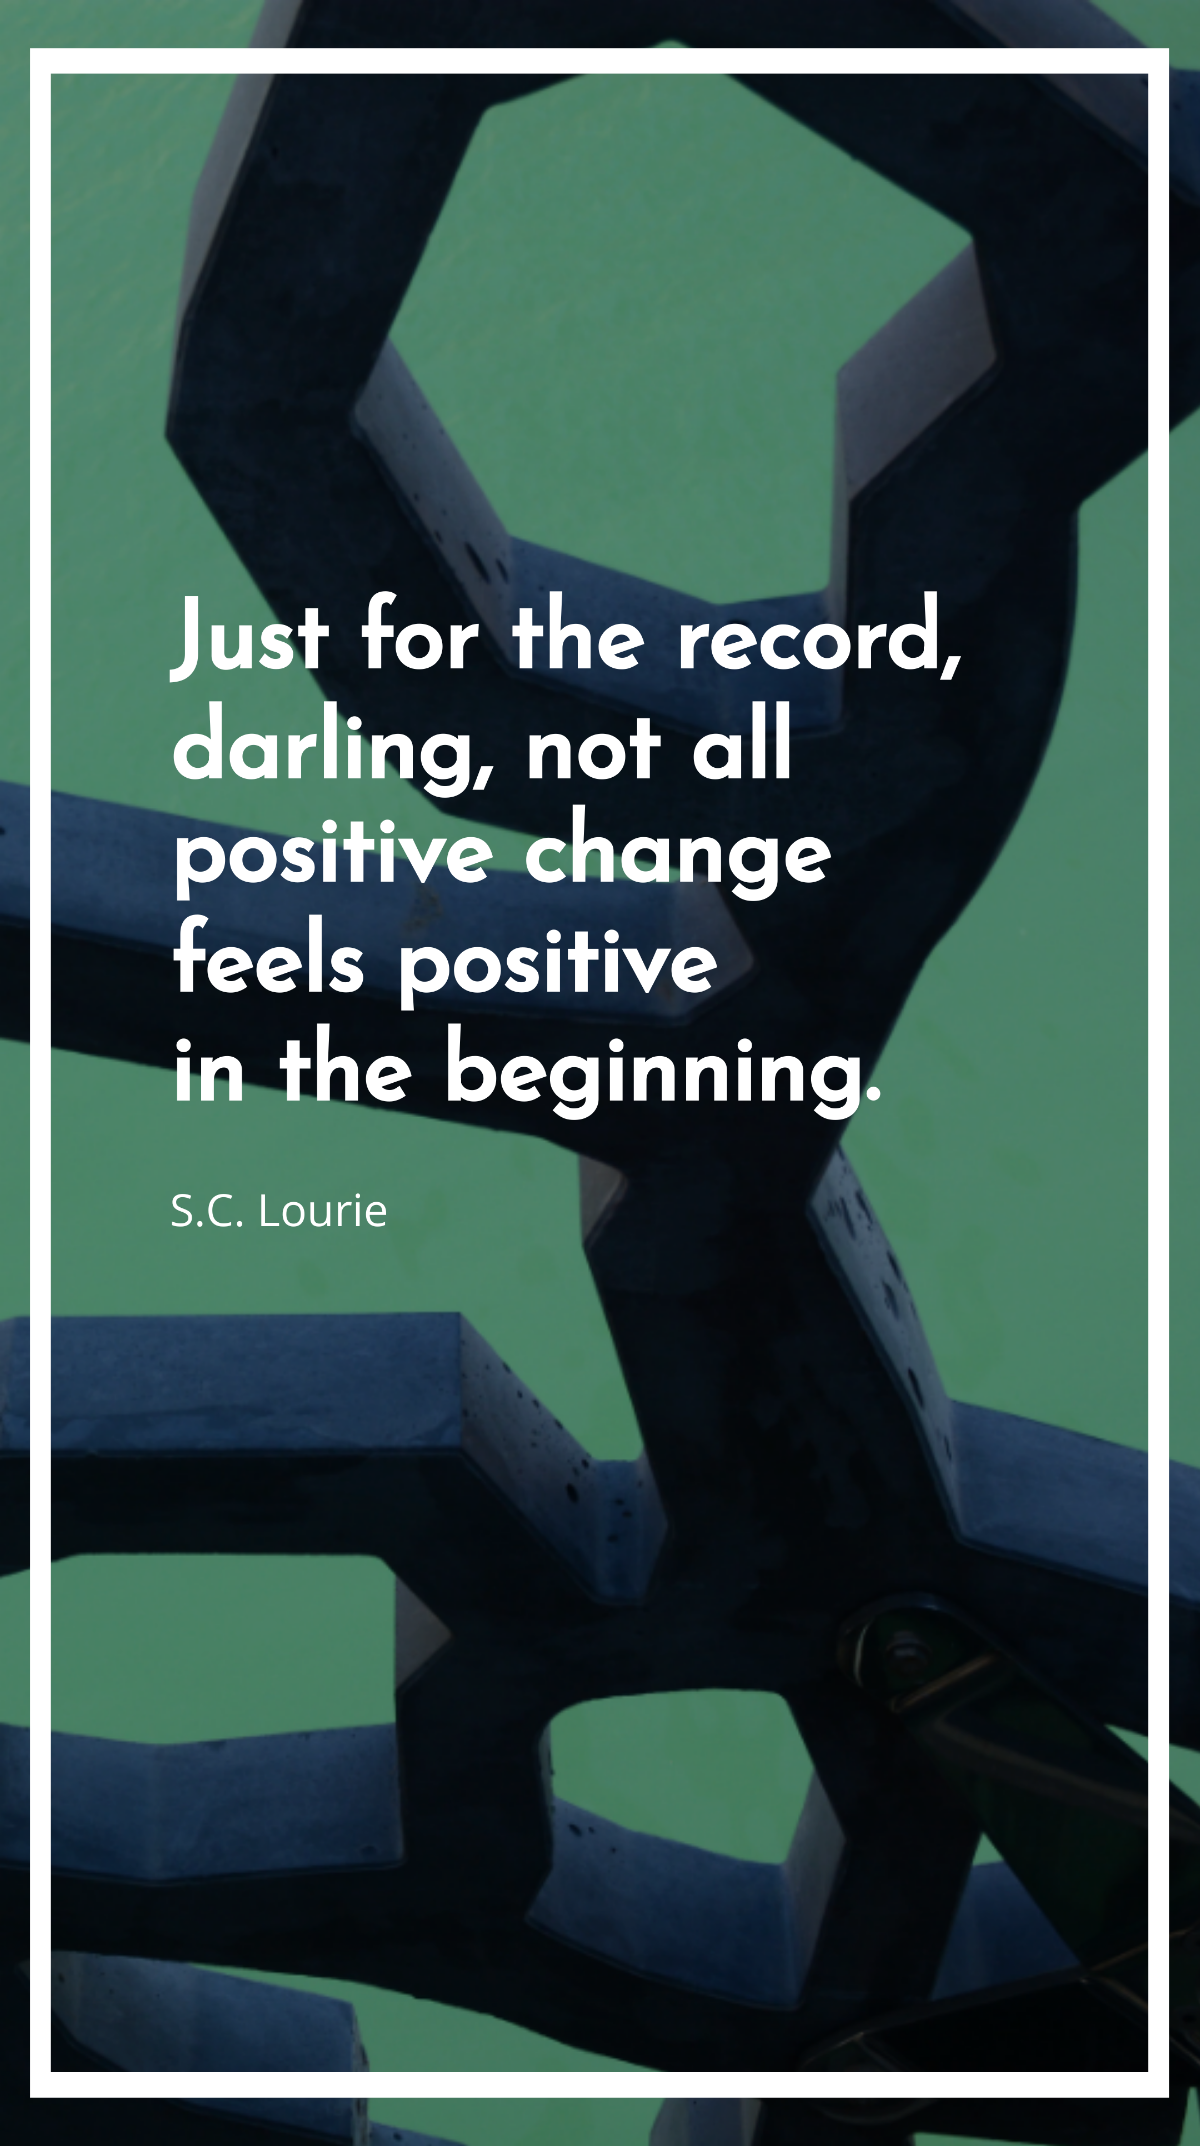 S.C. Lourie - Just for the record, darling, not all positive change feels positive in the beginning. Template